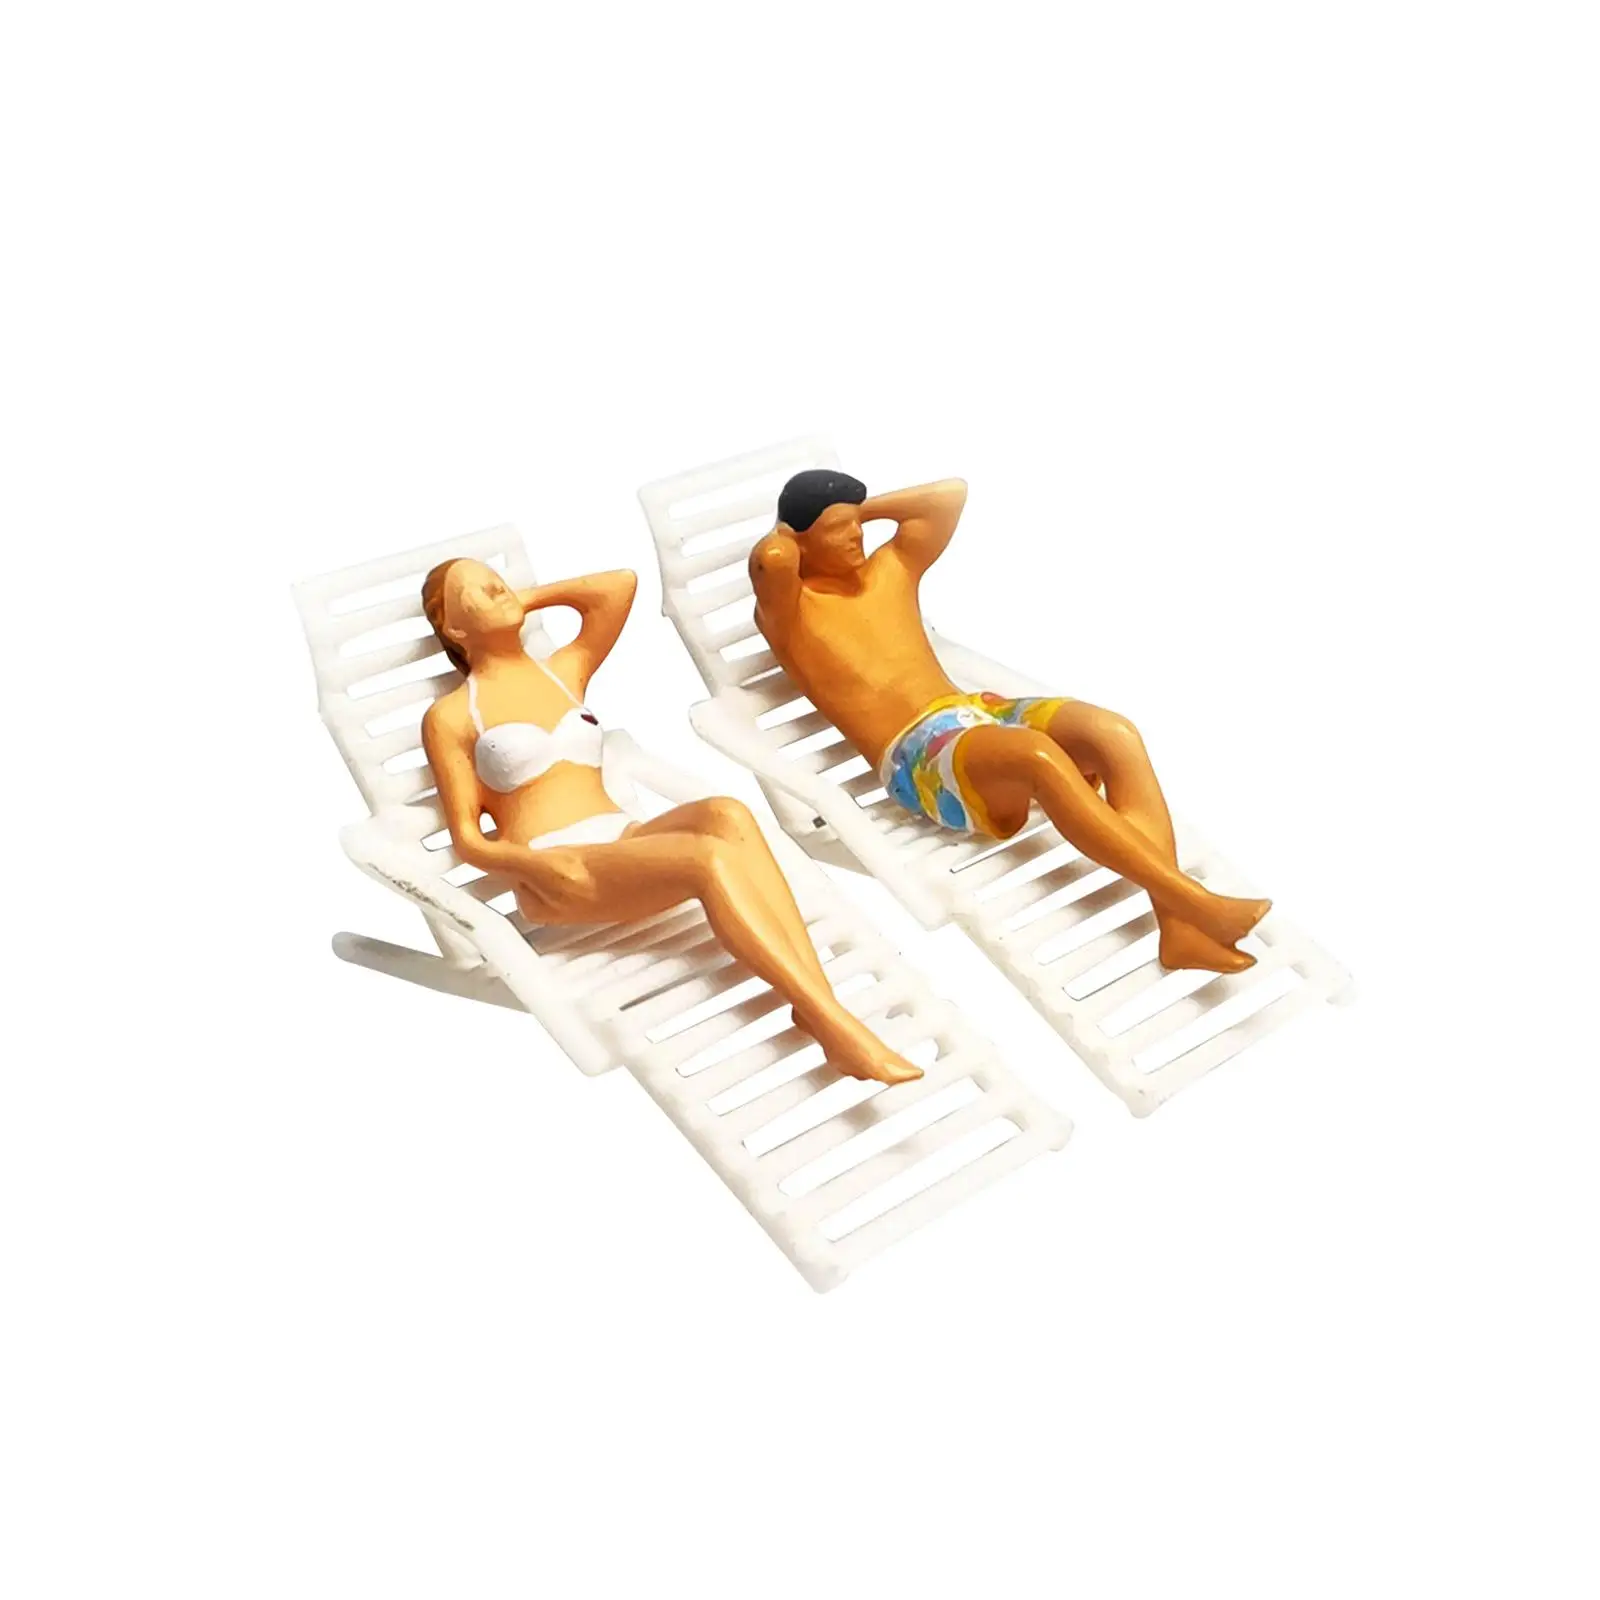 1/64 Scale People Figures Set Tiny People Miniature Longue Mini People Model Mini Beach Chair for Sand Table DIY Projects Layout